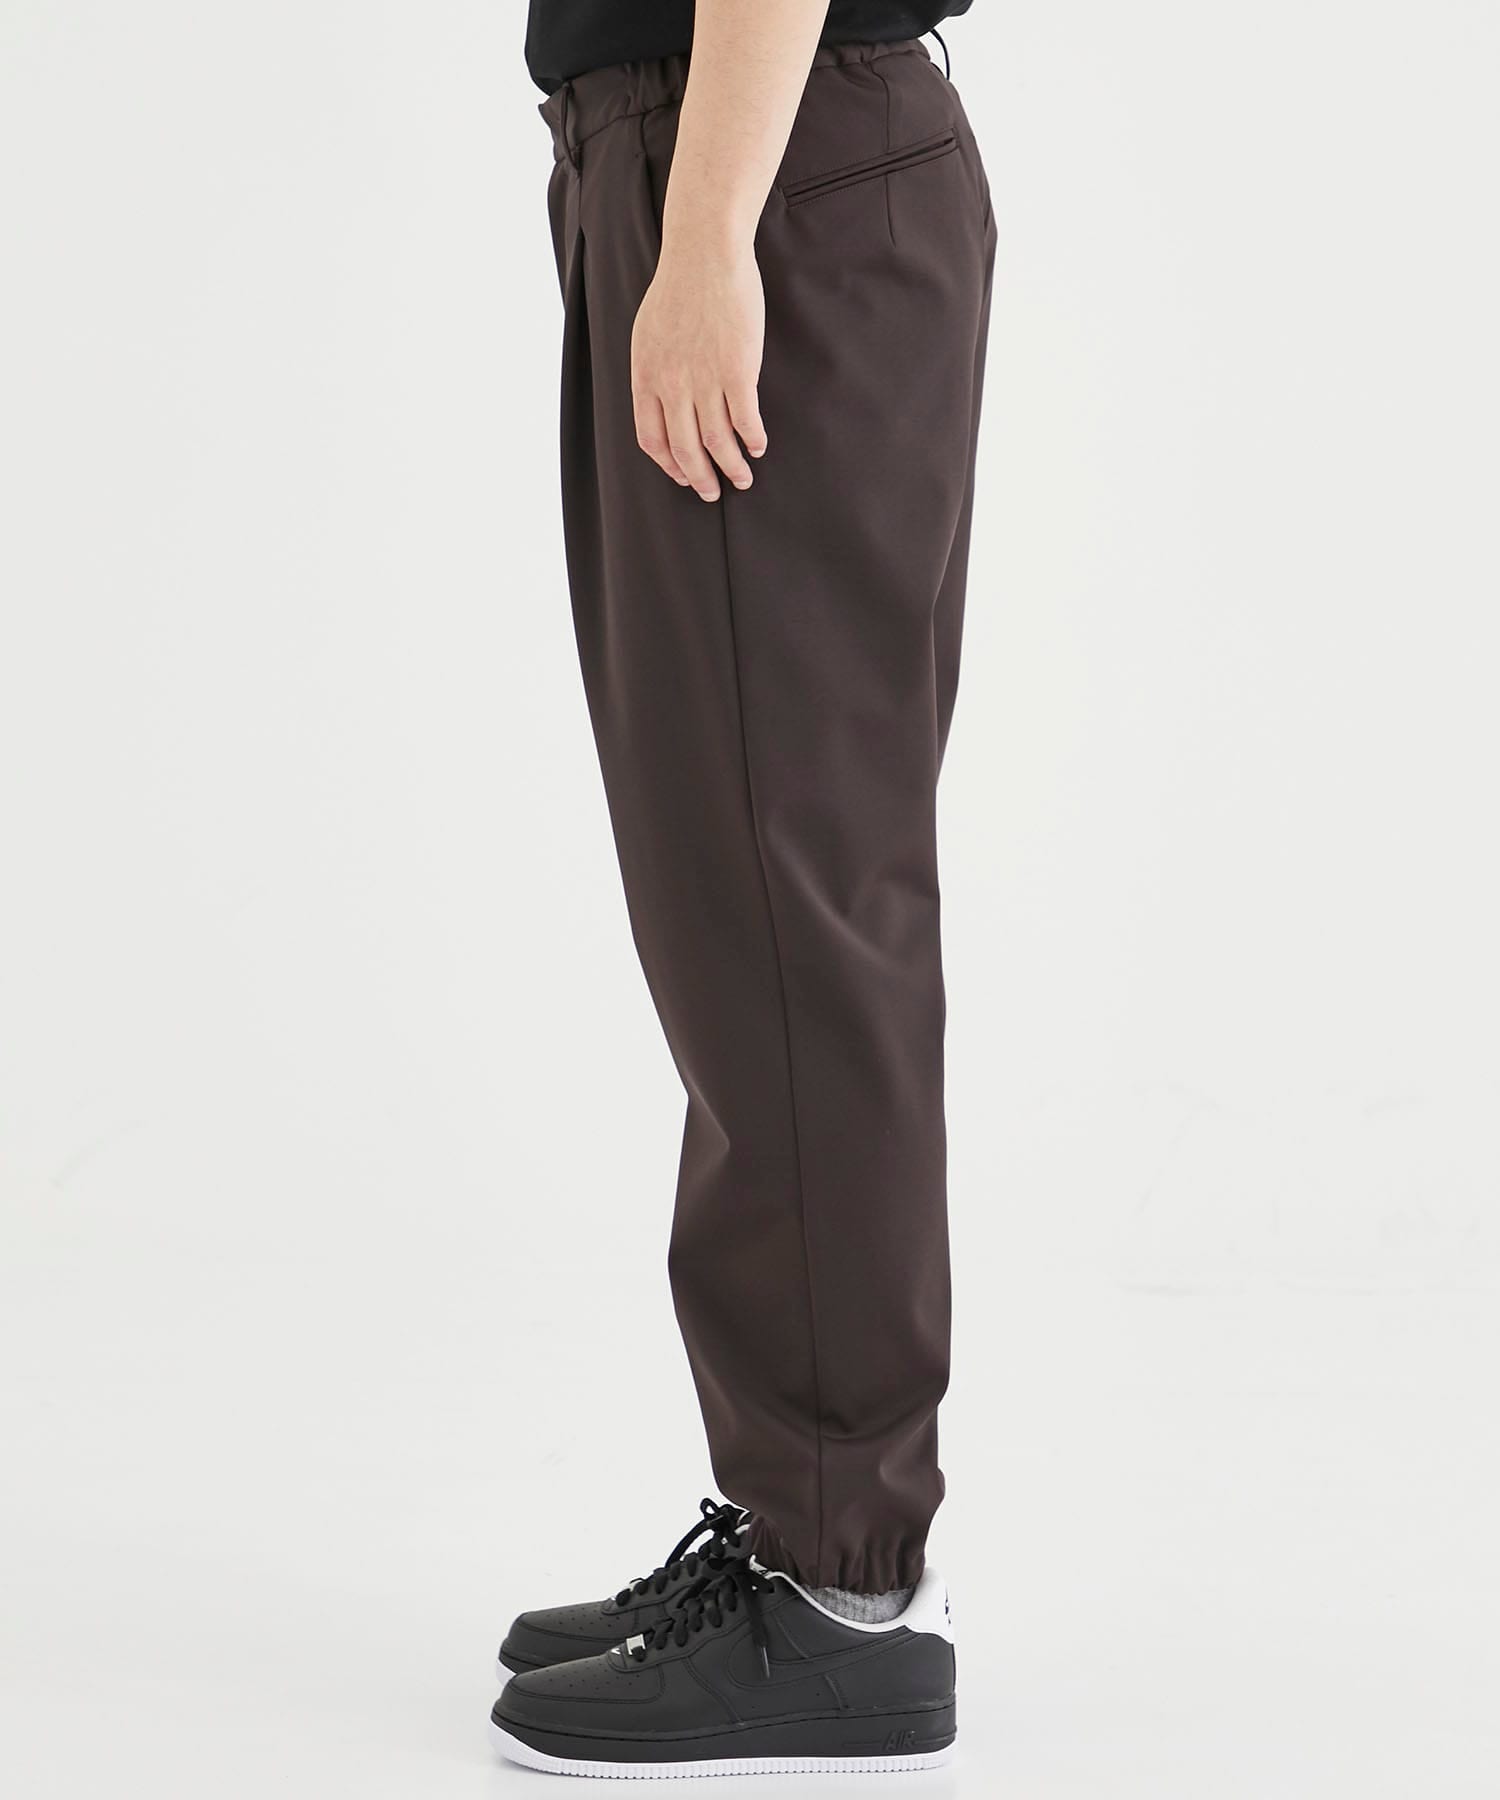 Washable High Function Jersey Easy Pants THE PERMANENT EYE